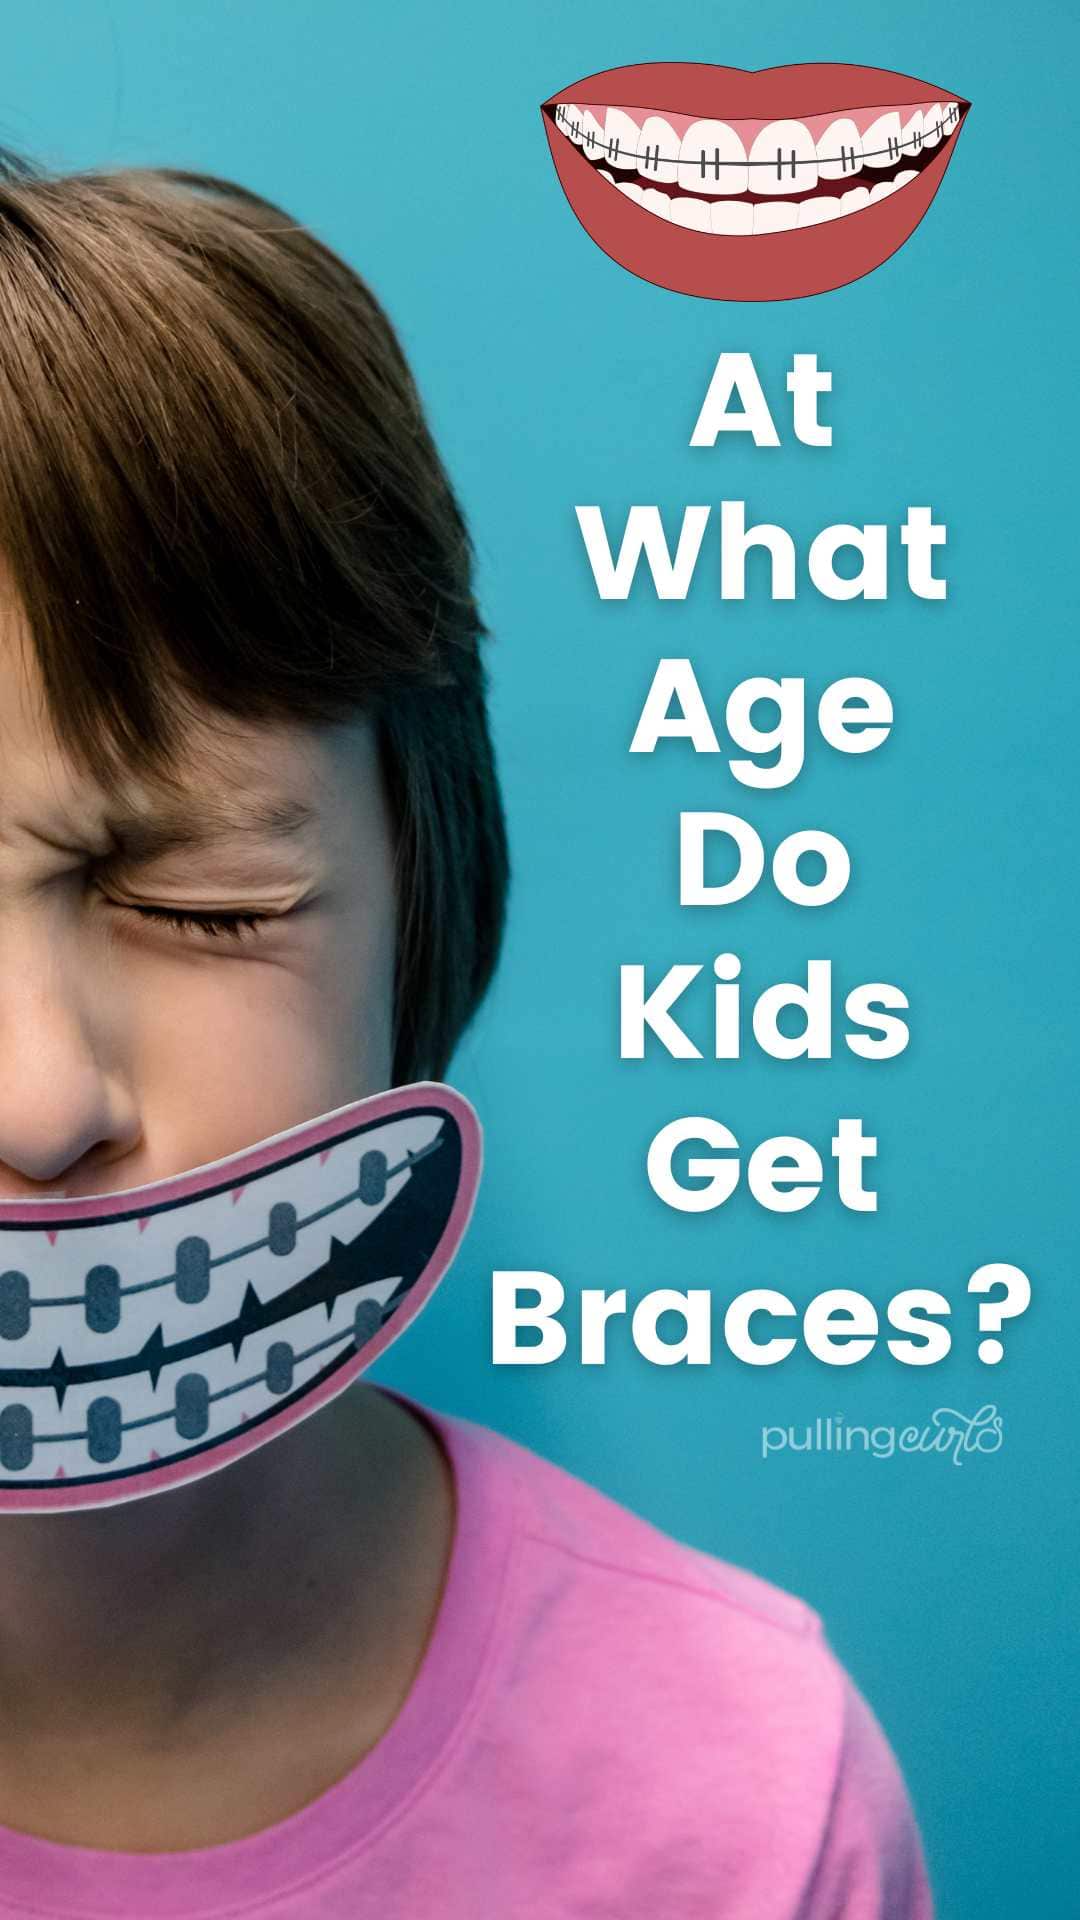 There is no one definitive answer to this question as orthodontic procedures vary depending on the child's age, severity of misalignment, and other individual factors. However, a general guideline for when braces are typically recommended is between the ages of 7 and 14. So if you're wondering about when do kids get braces, you can use this information as a starting point. Keep in mind that every case is different, so it's important to consult with an orthodontist to determine what's best via @pullingcurls